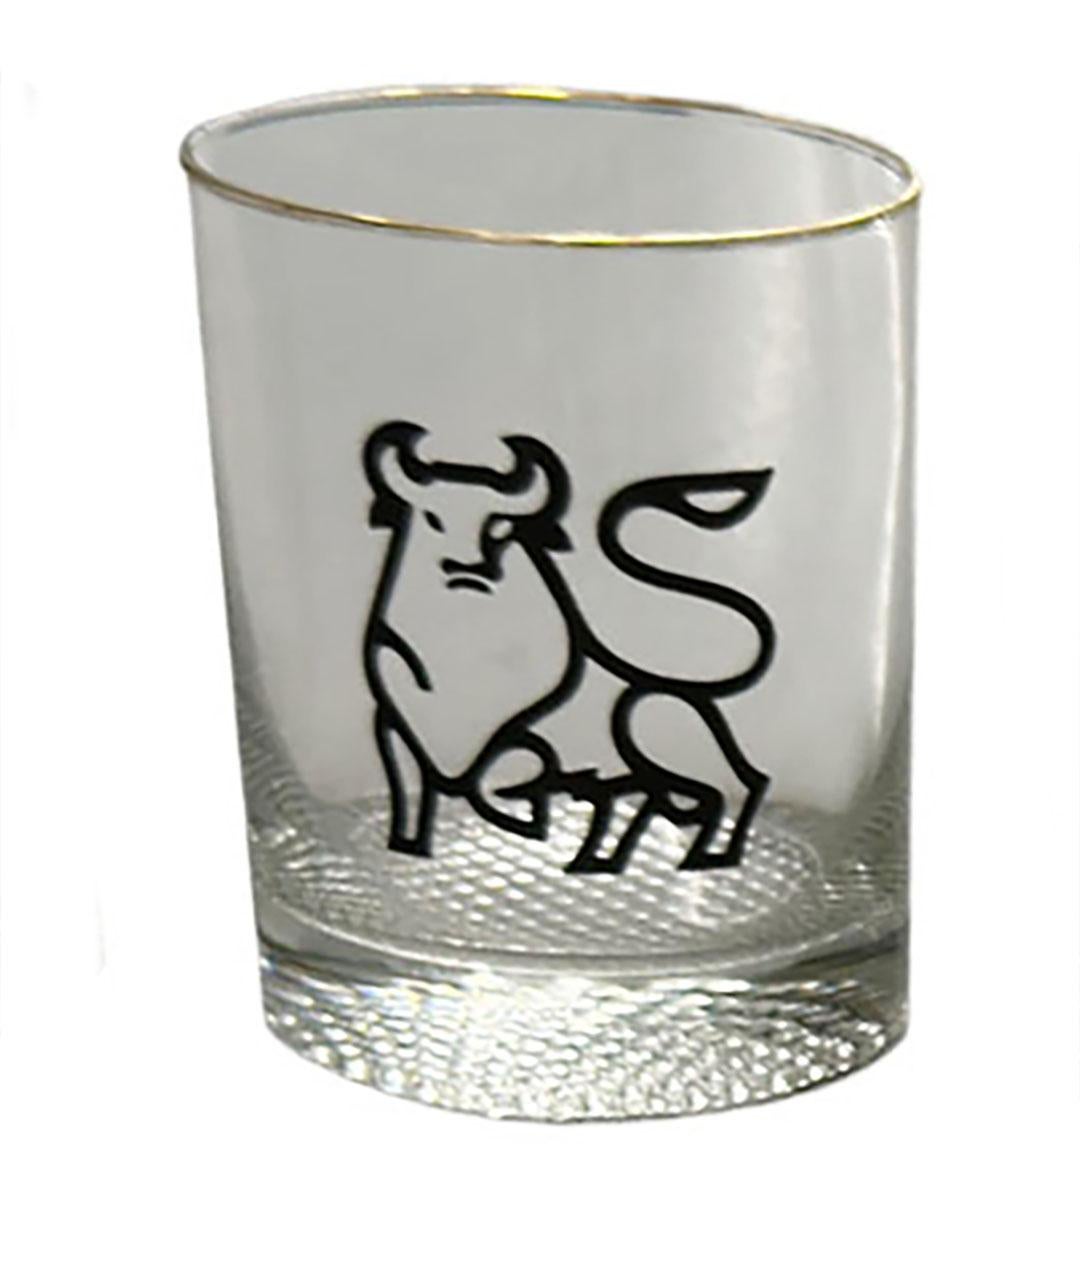 Six Lowball Drinking Glasses With Bulls In Good Condition For Sale In Clearwater, FL